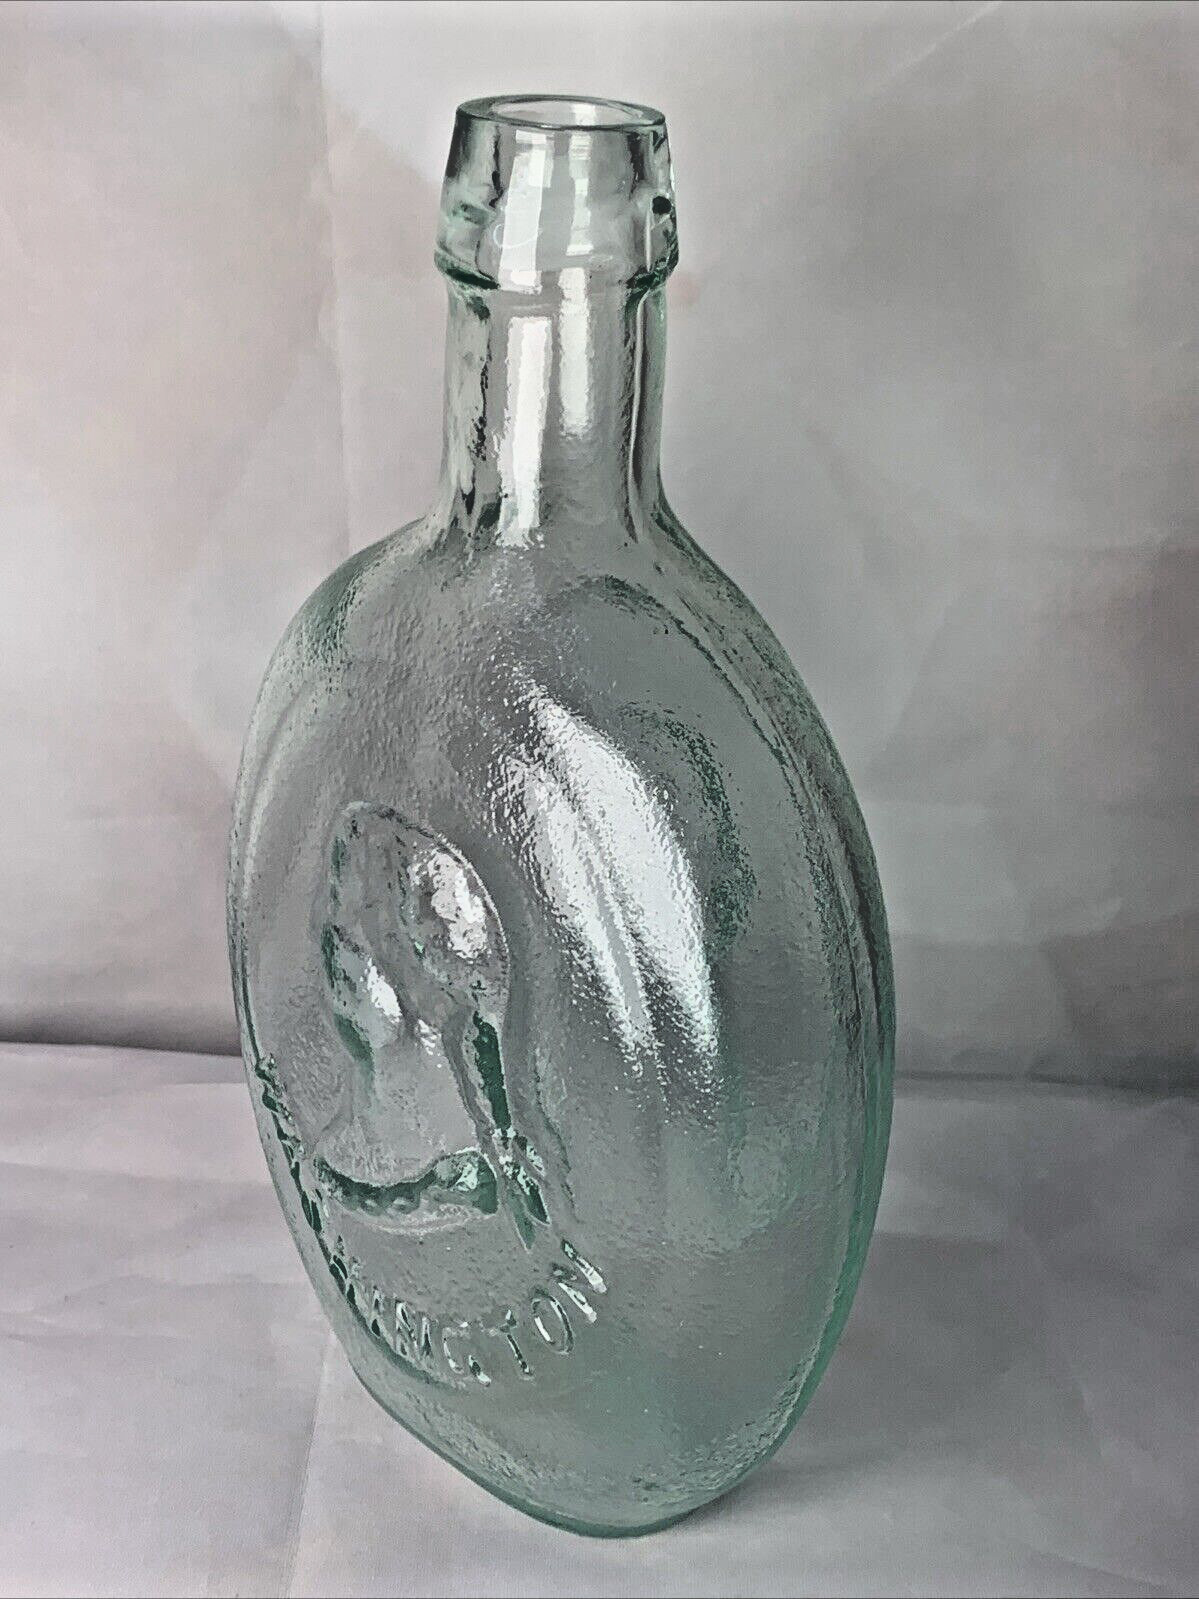 HISTORICAL Glass Campaign Flask Washington C.Z. Taylor mint green tinted glass